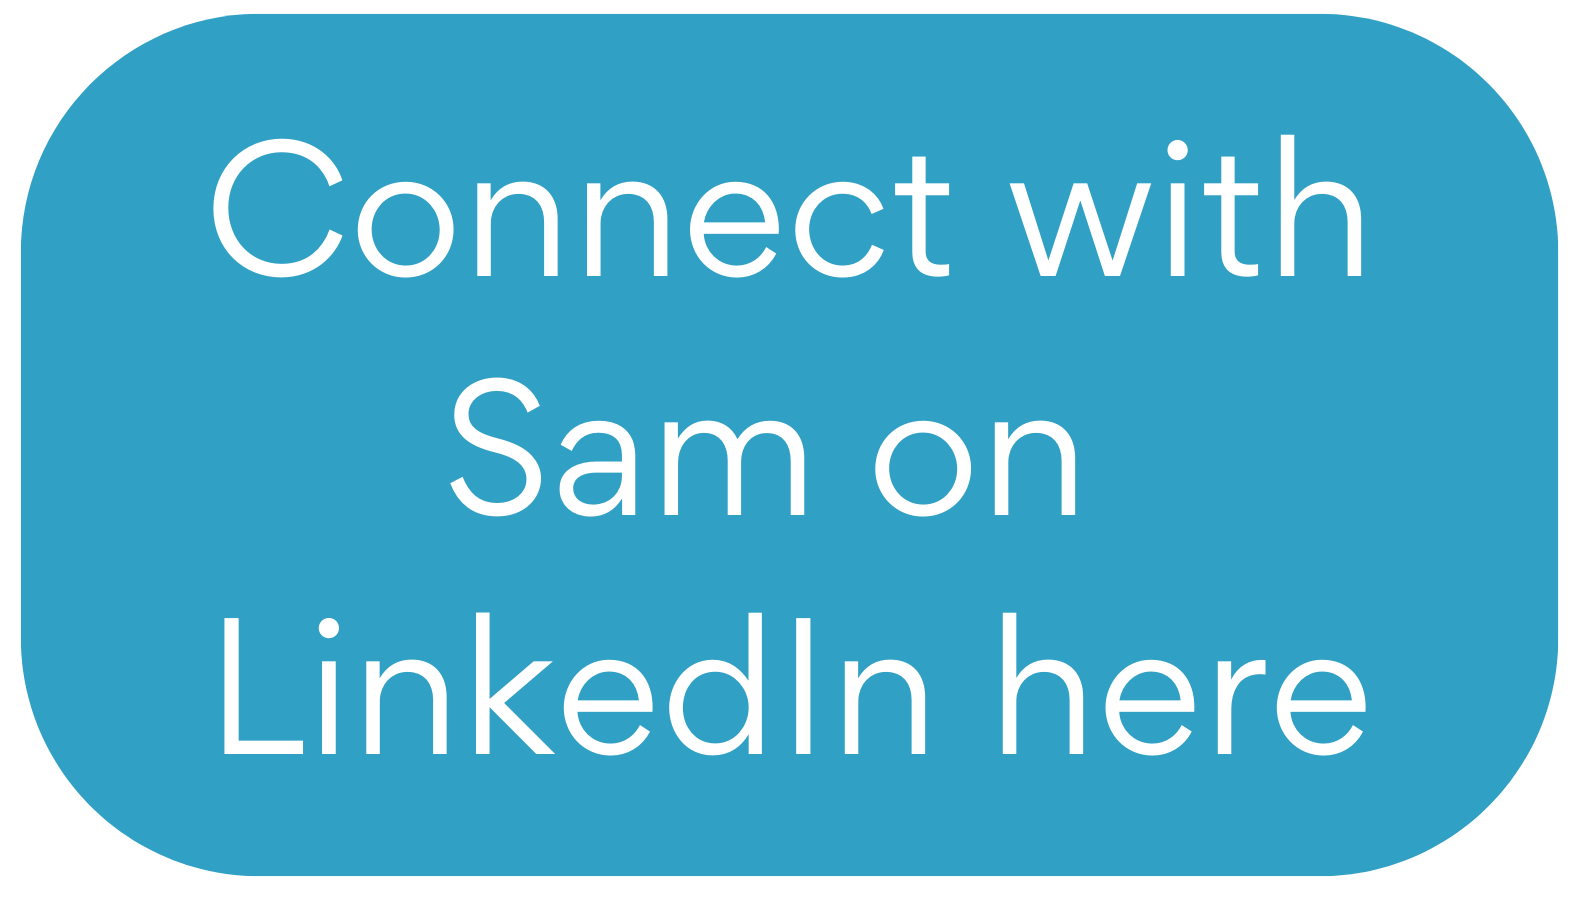 Connect with Sam on Linked in here